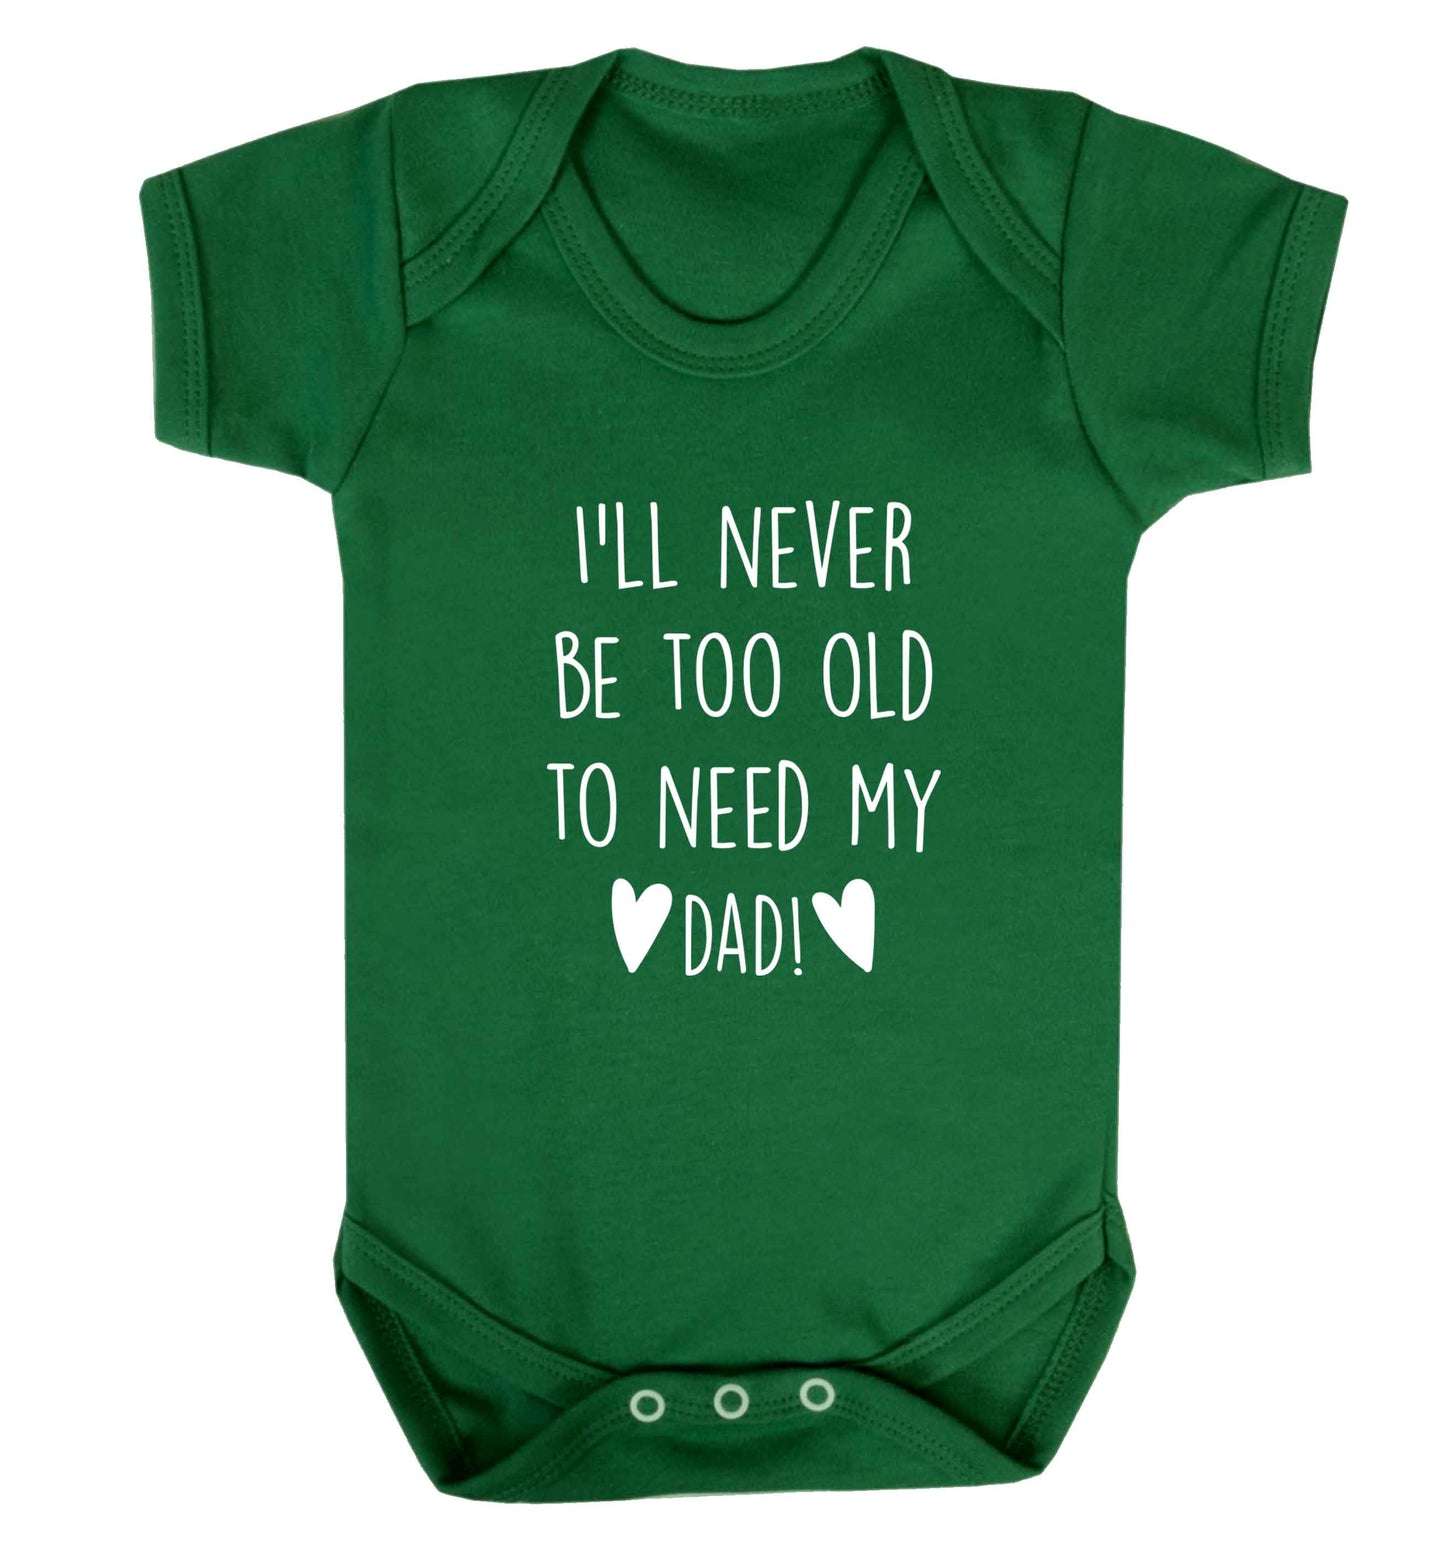 I'll never be too old to need my dad baby vest green 18-24 months